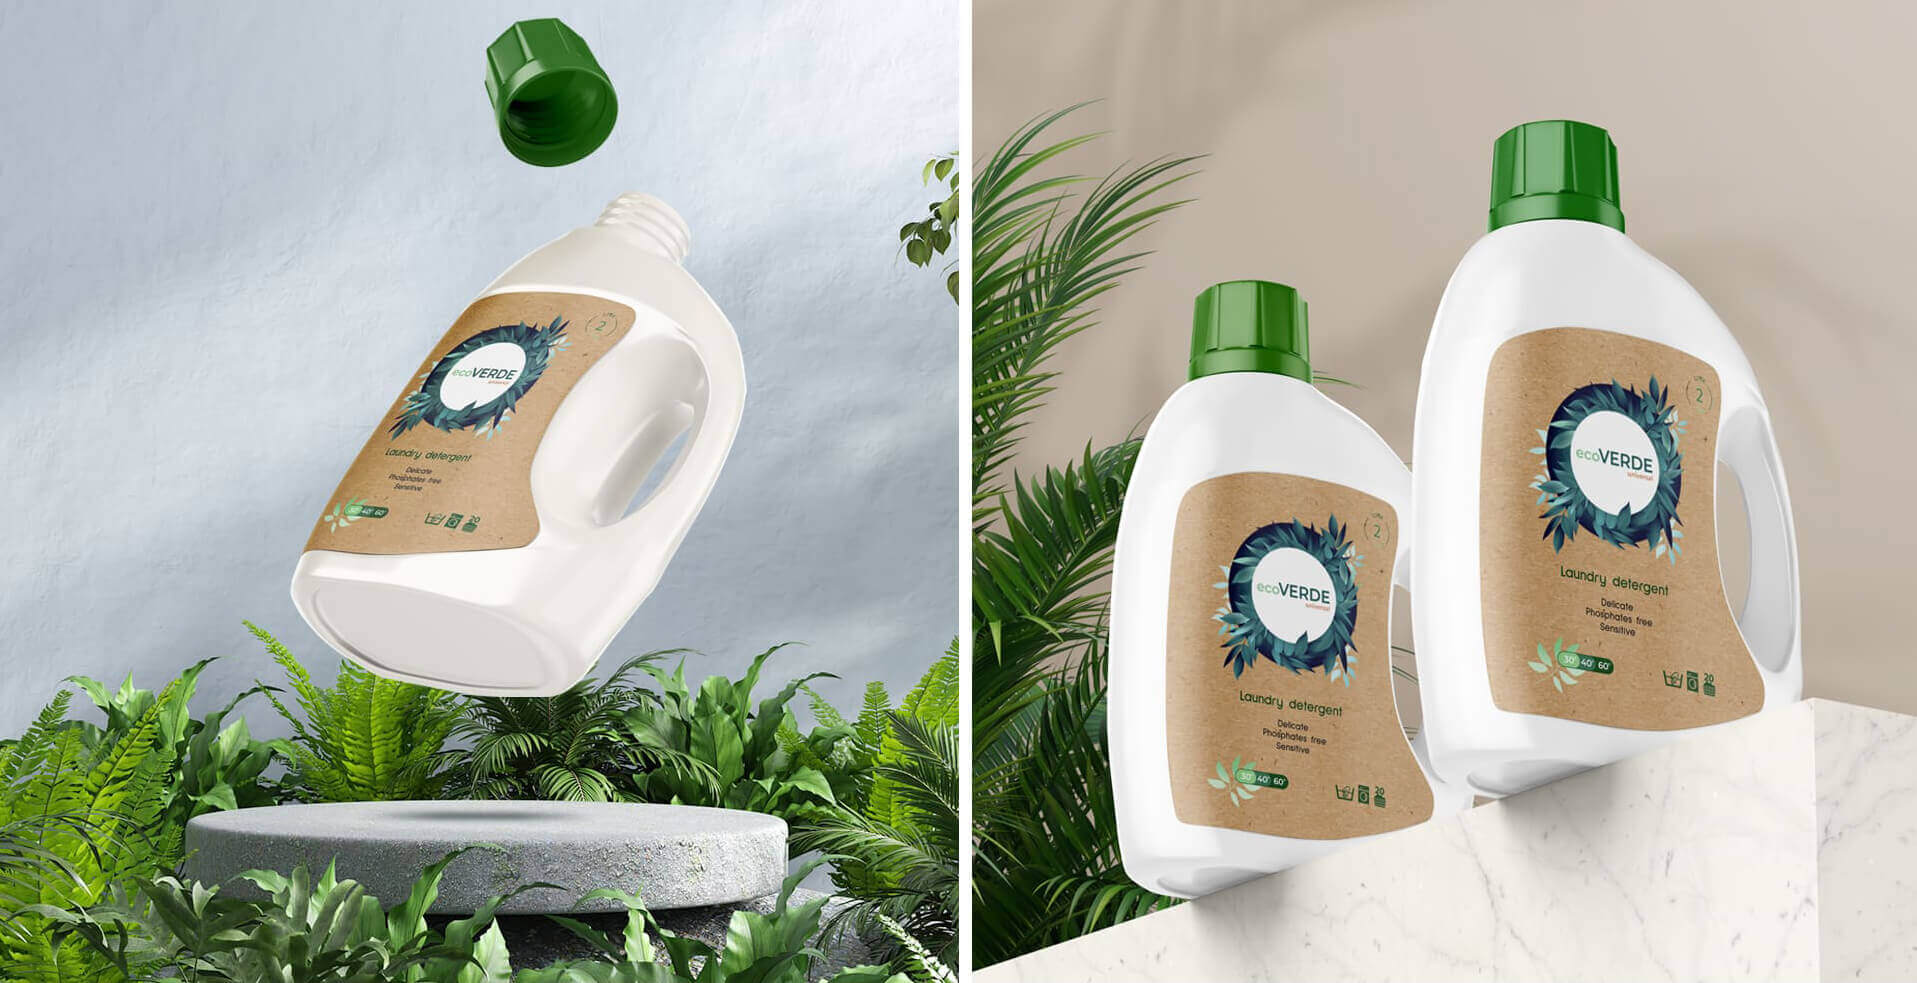 Ecoverde package design